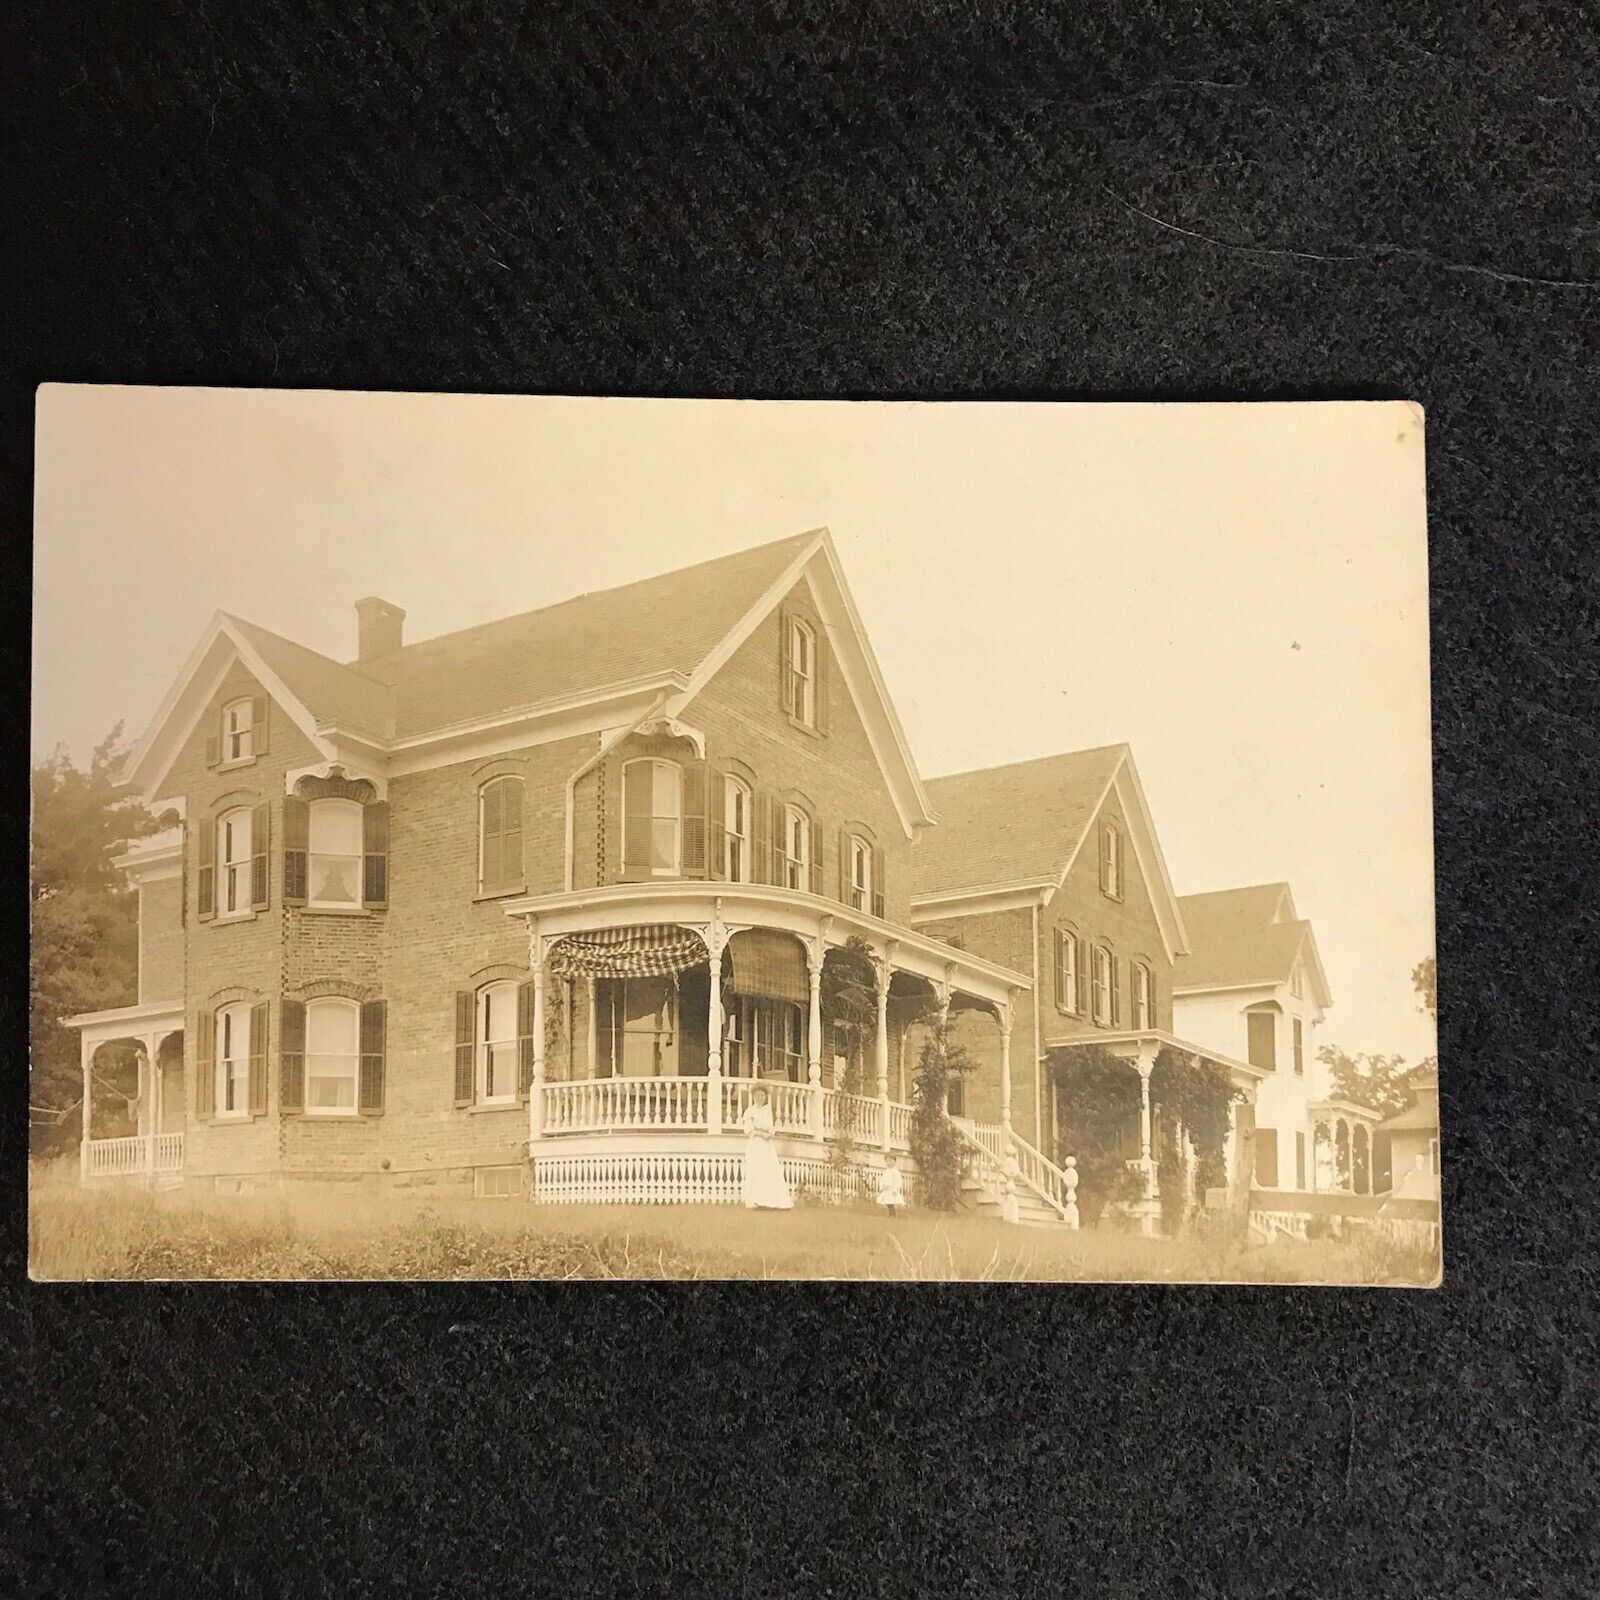 RPPC Real Photo Postcard 1907-1910 Ethereal Ghostly Woman Victorian Home Sepia